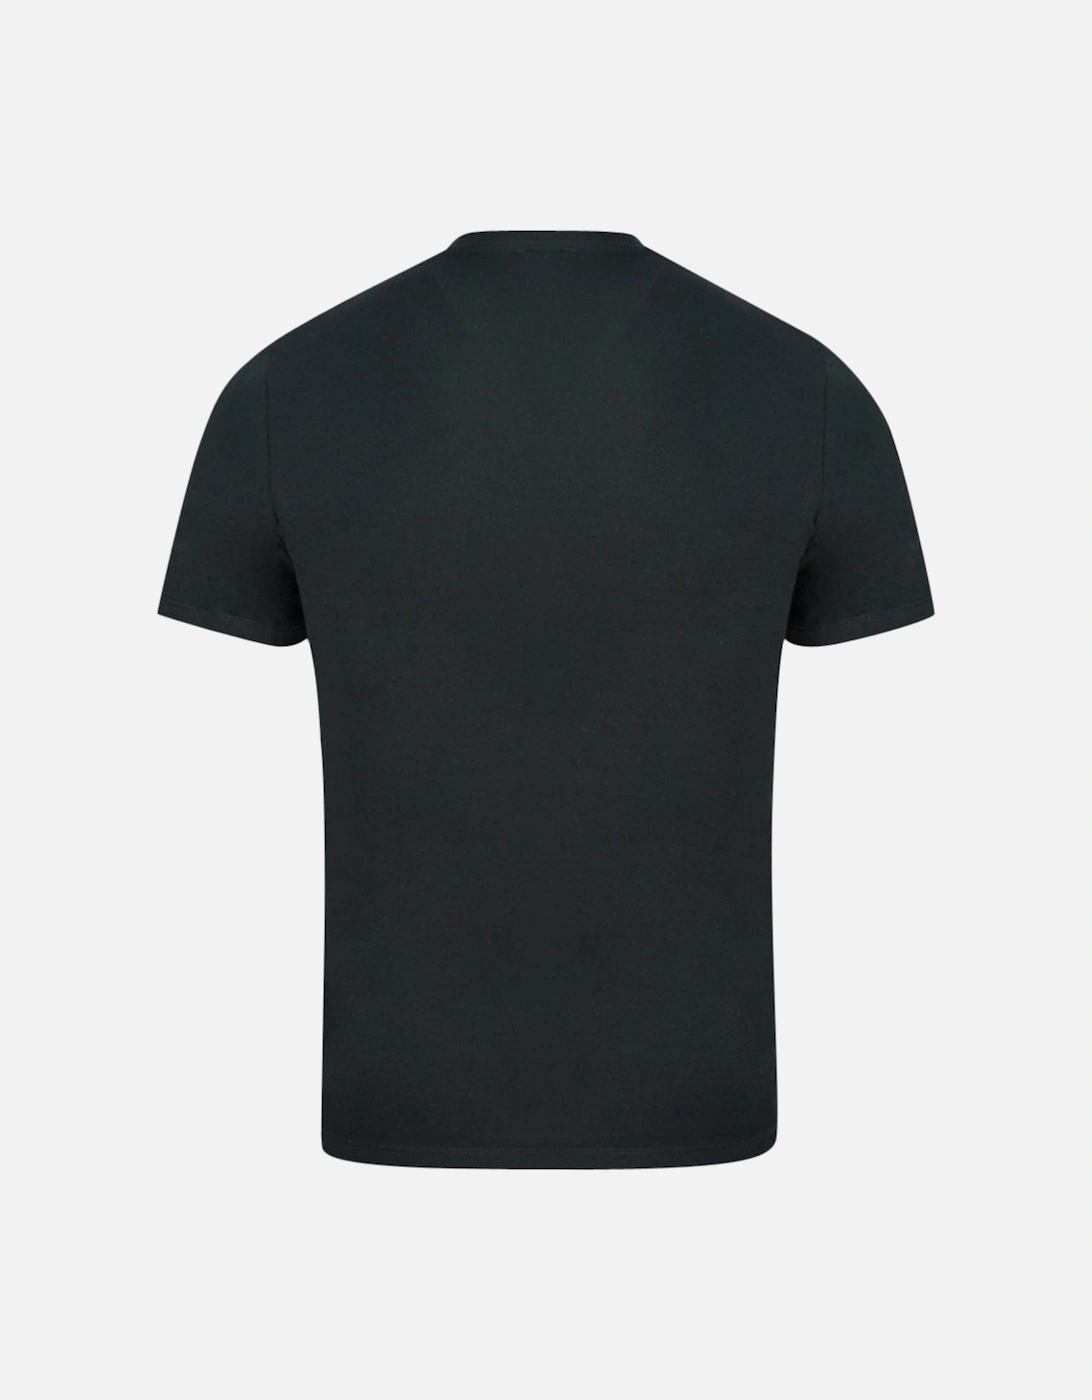 Physical Education Cool Fit Black T-Shirt